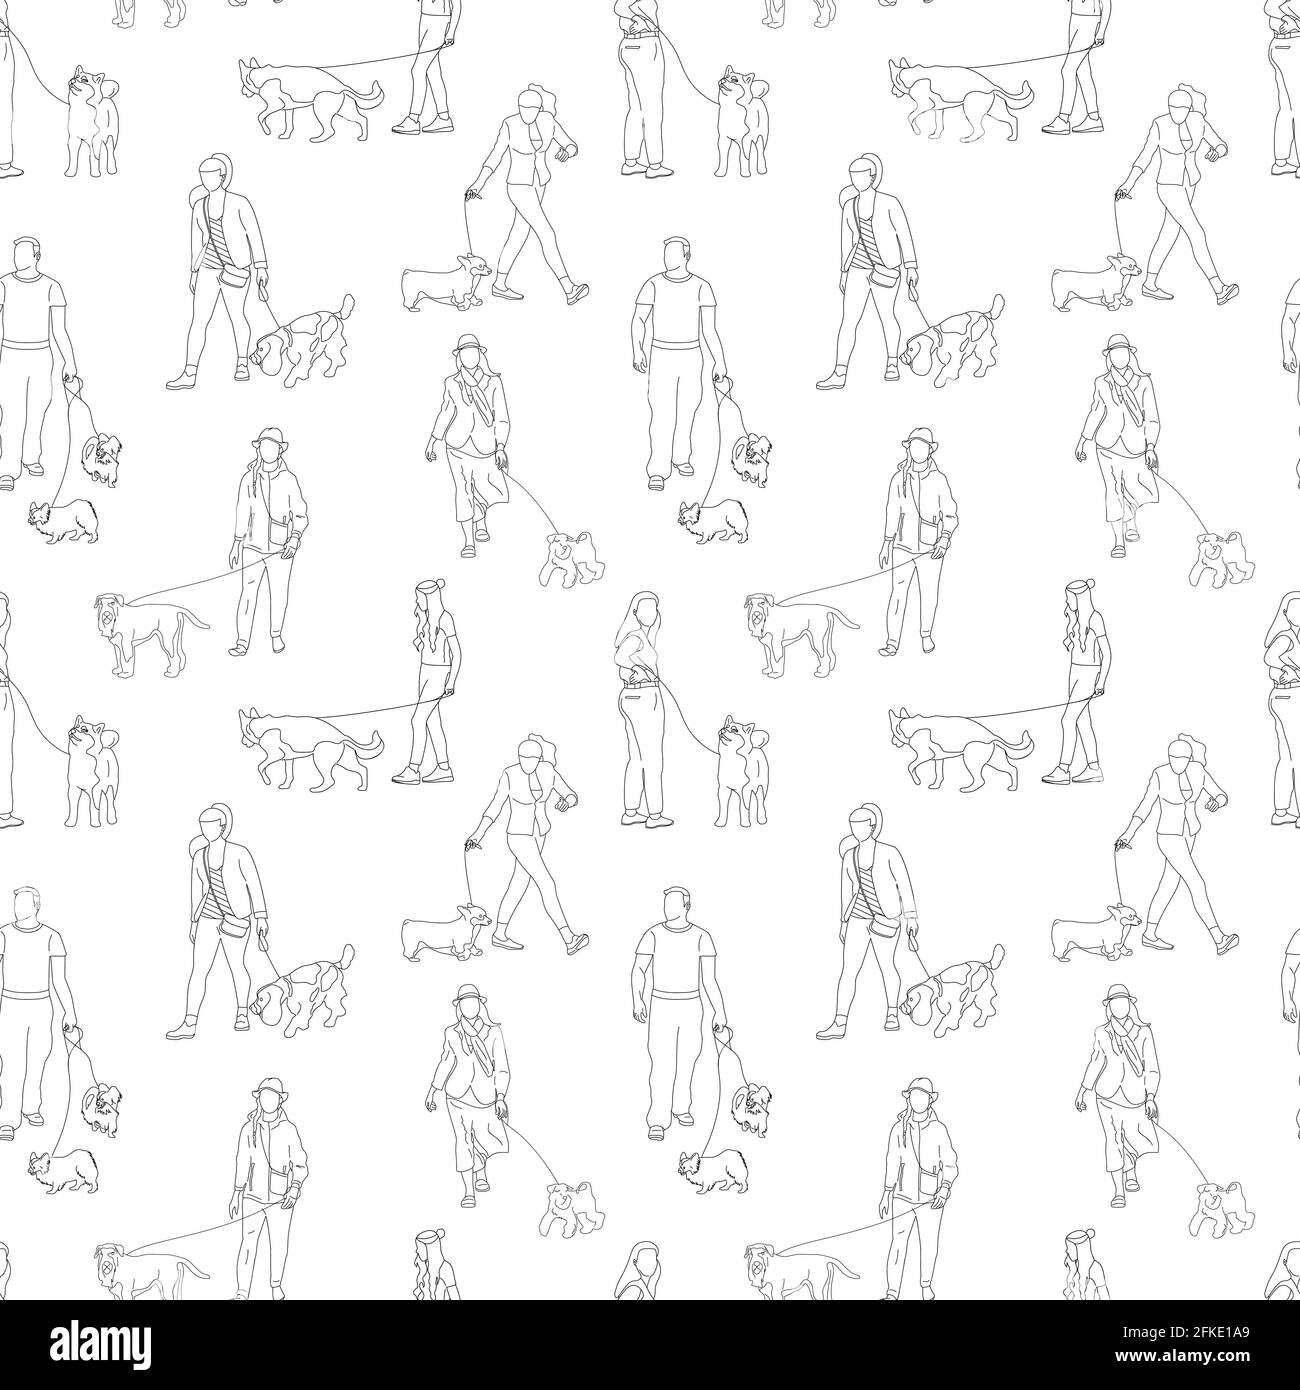 Black and white monochrome seamless pattern with many people walking with dogs. Line art. Stock Vector